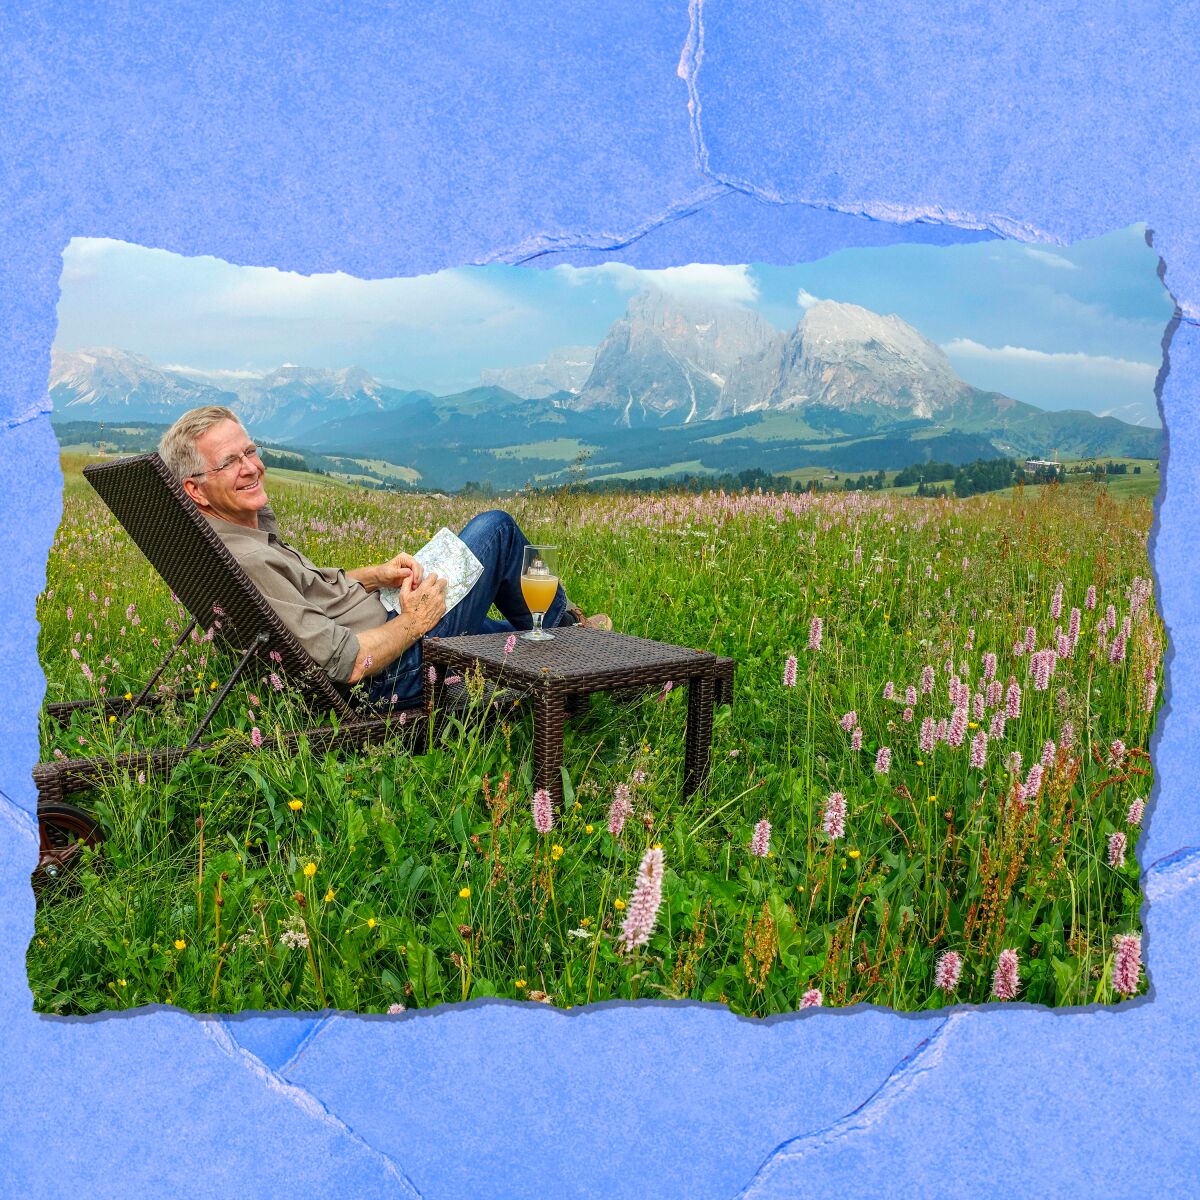 A man leans back in a chair, a drink at his side, amid a field of flowers with a view of majestic mountains.